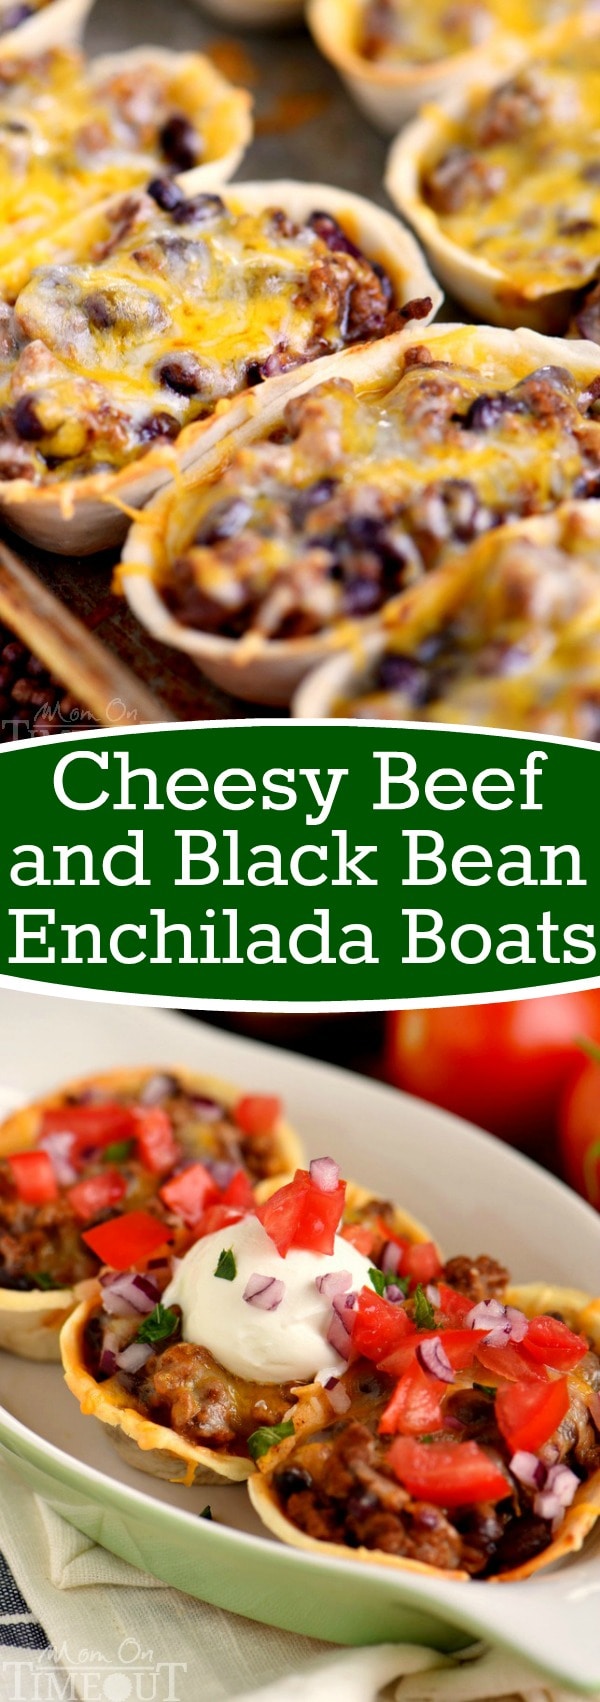 These Cheesy Beef and Black Bean Enchilada Boats are the perfect quick dinner on busy weeknights! Packed full of flavor and so fun to eat!